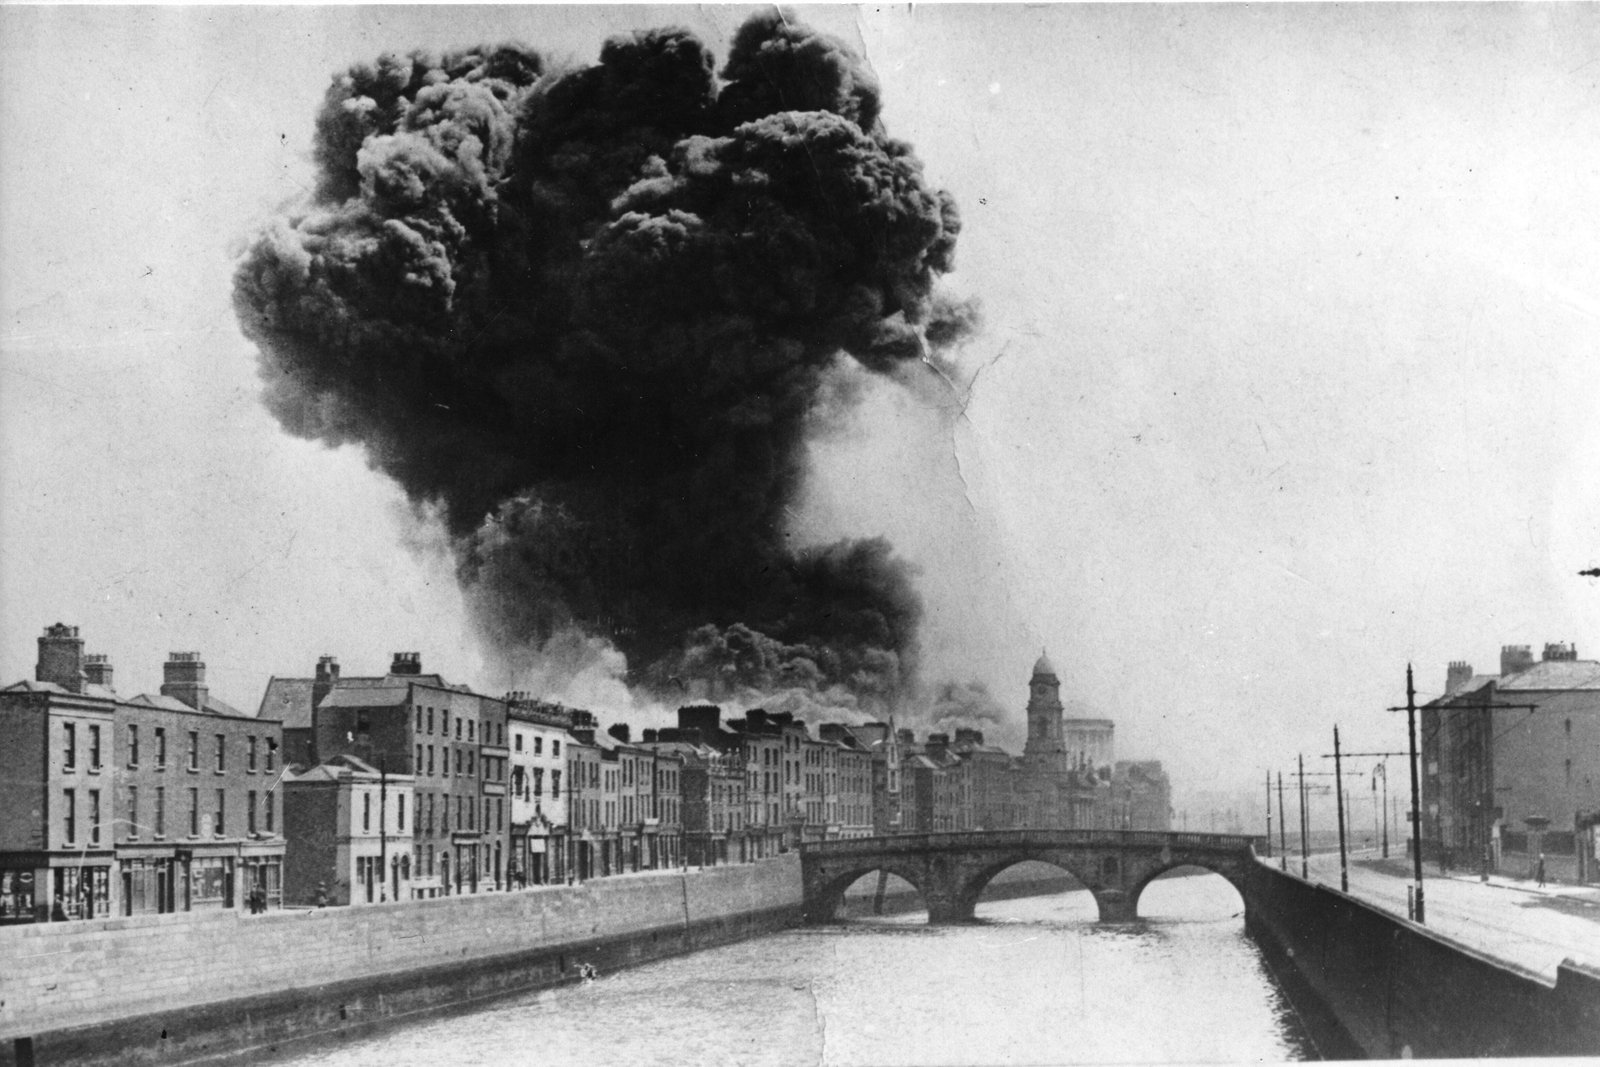 Image - The moment of the explosion. Image courtesy of the Irish Architectural Archive